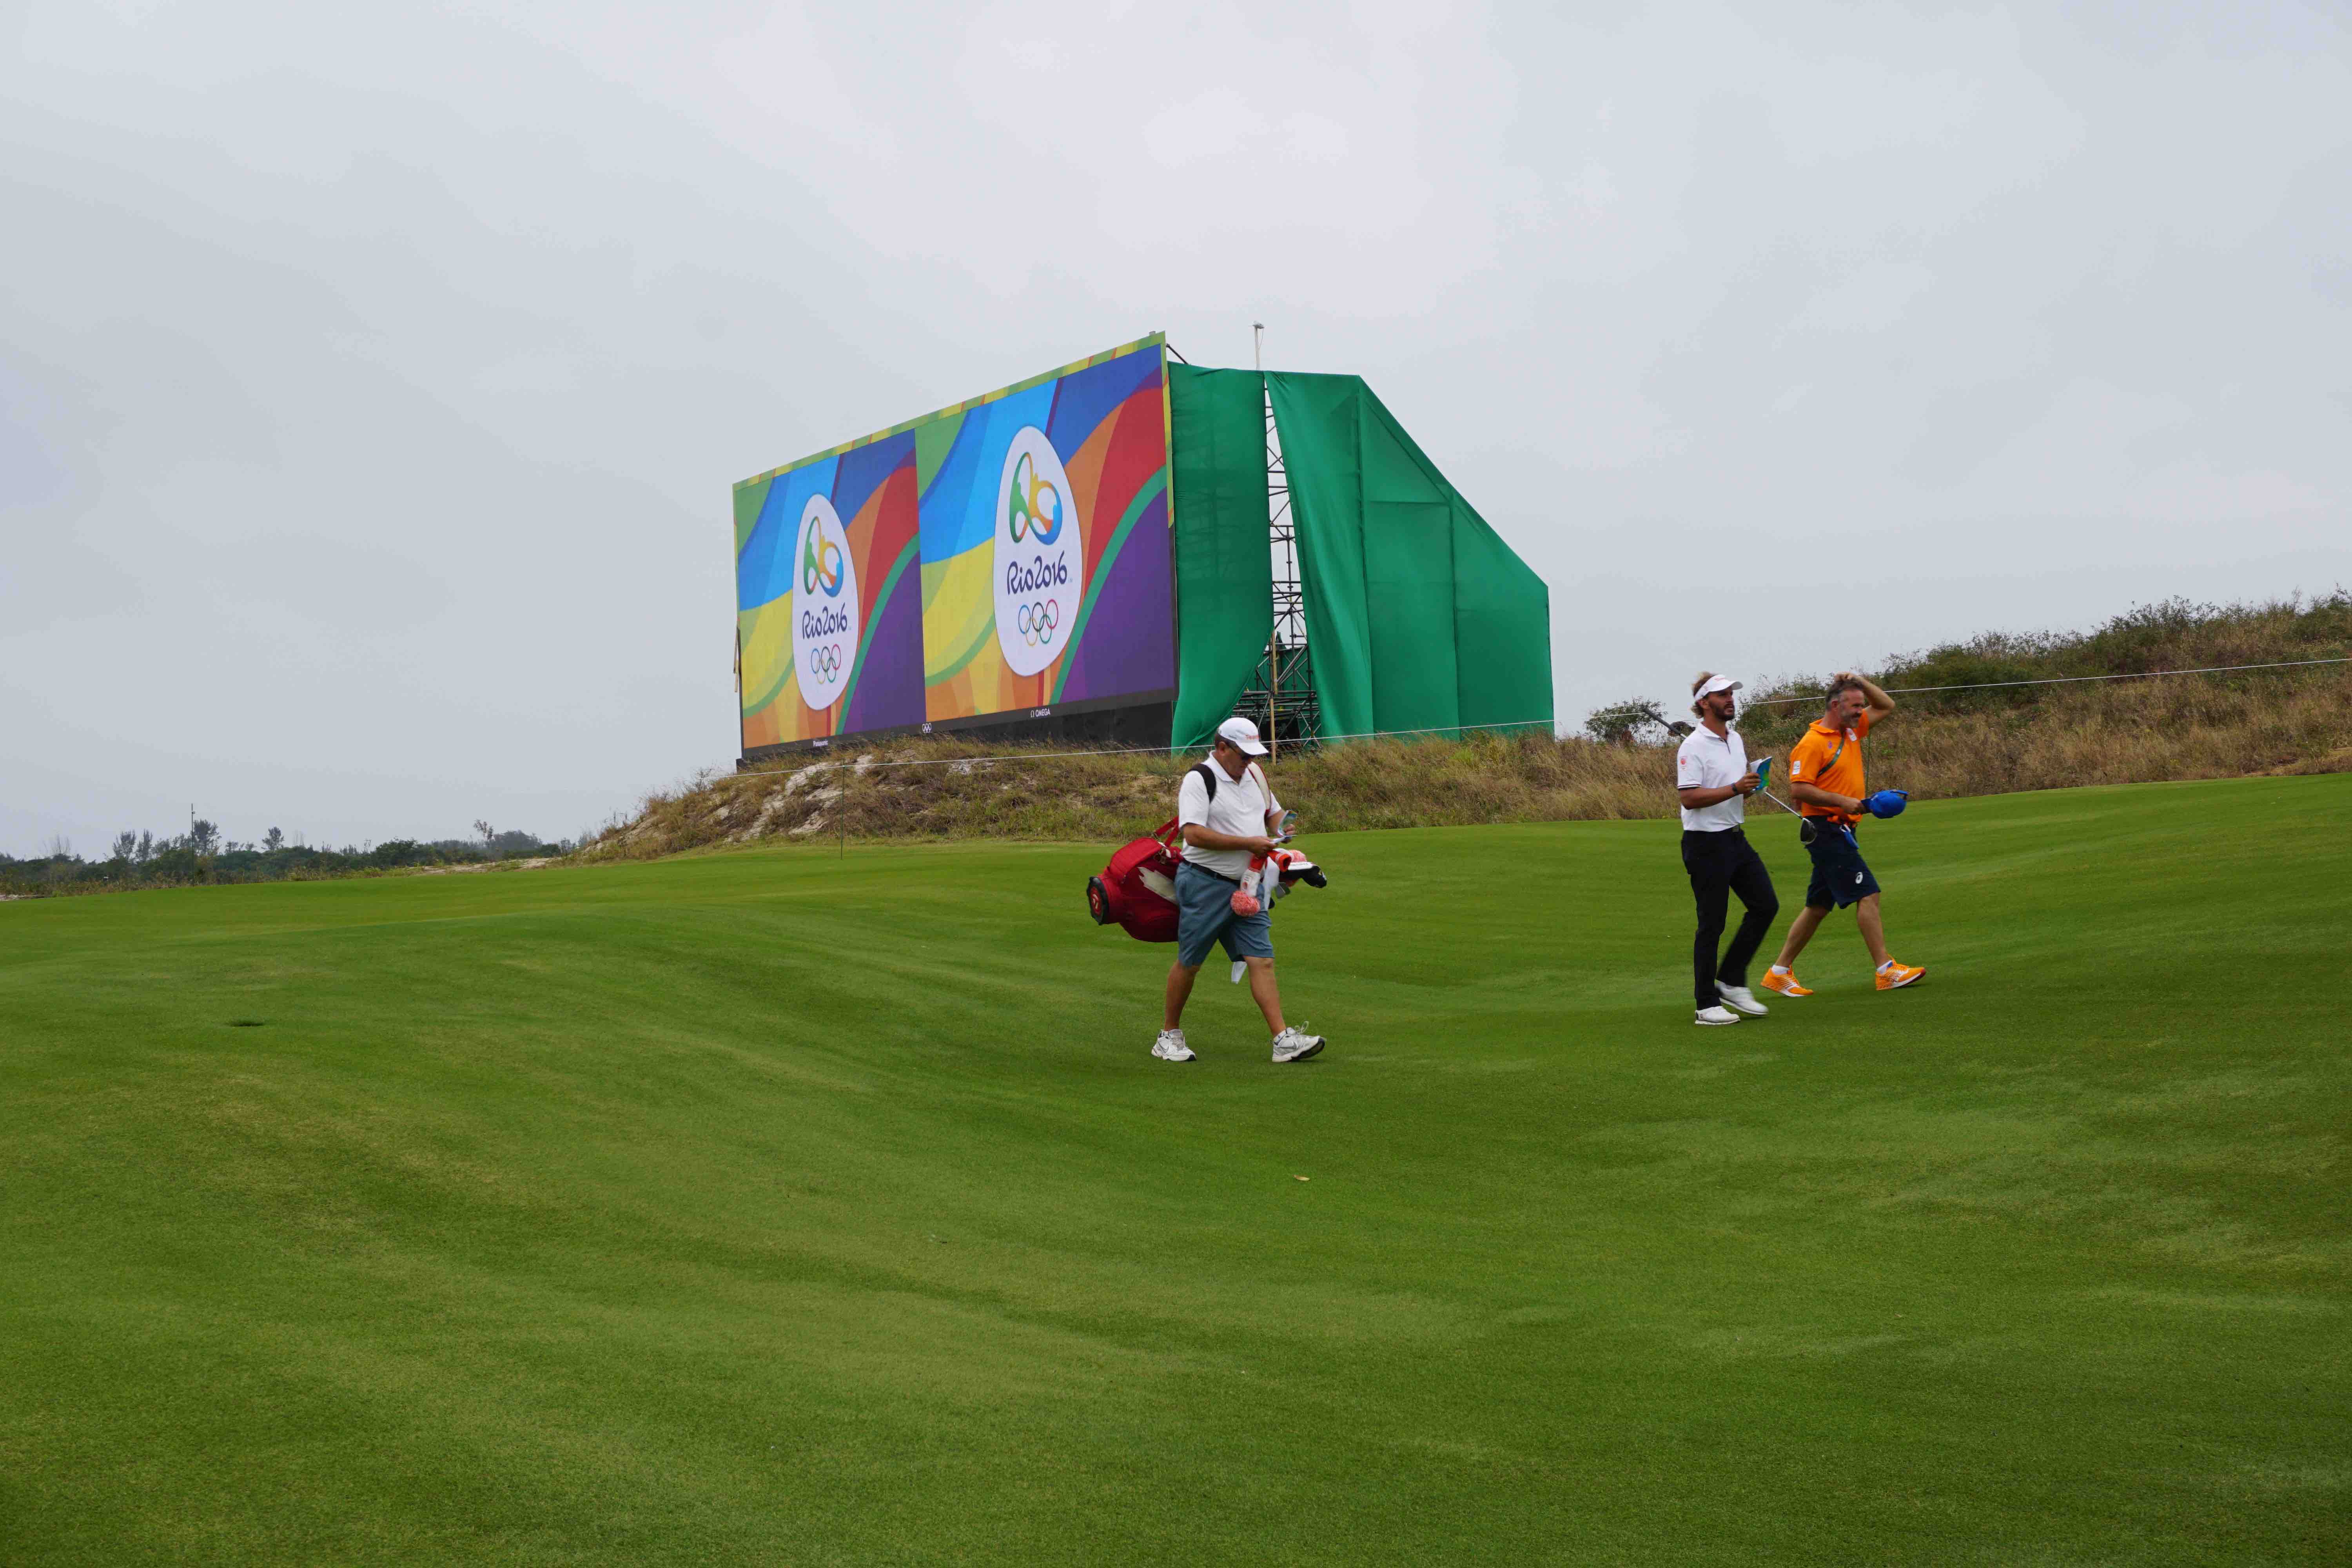 Rio Olympic Golf Course